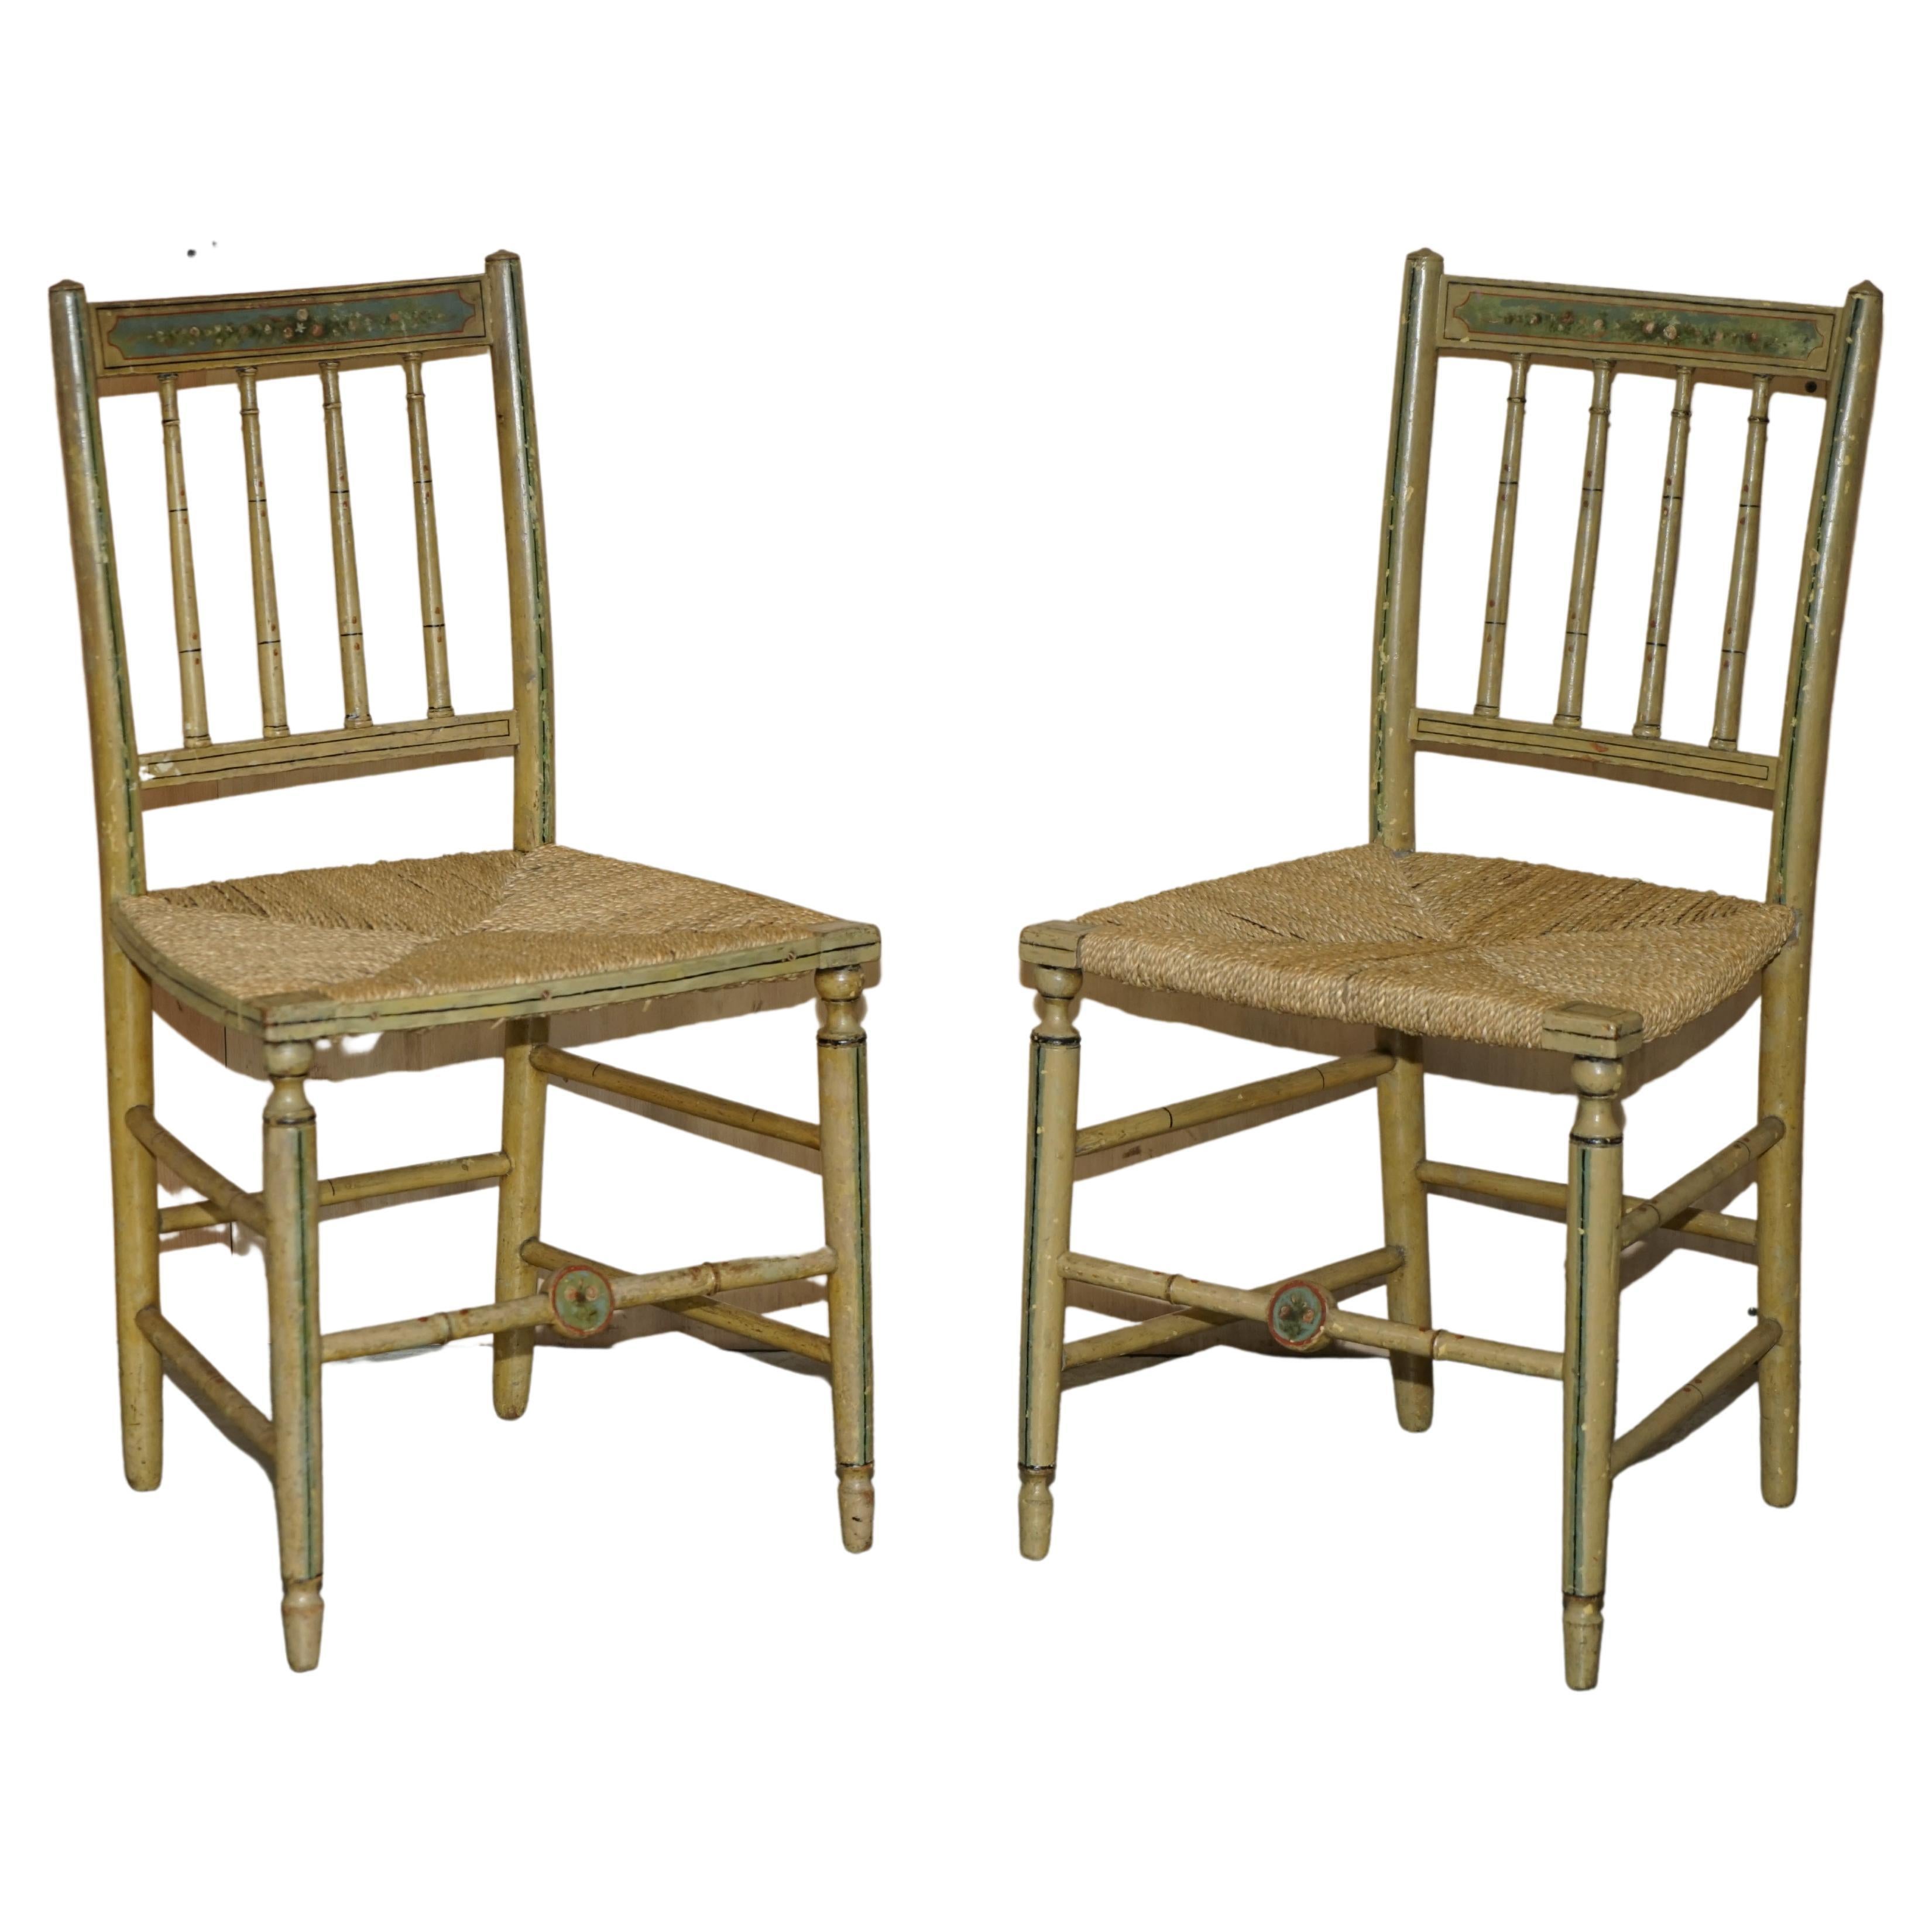 Pair of Original Hand Painted Antique Regency circa 1810-1820 Side Chairs For Sale